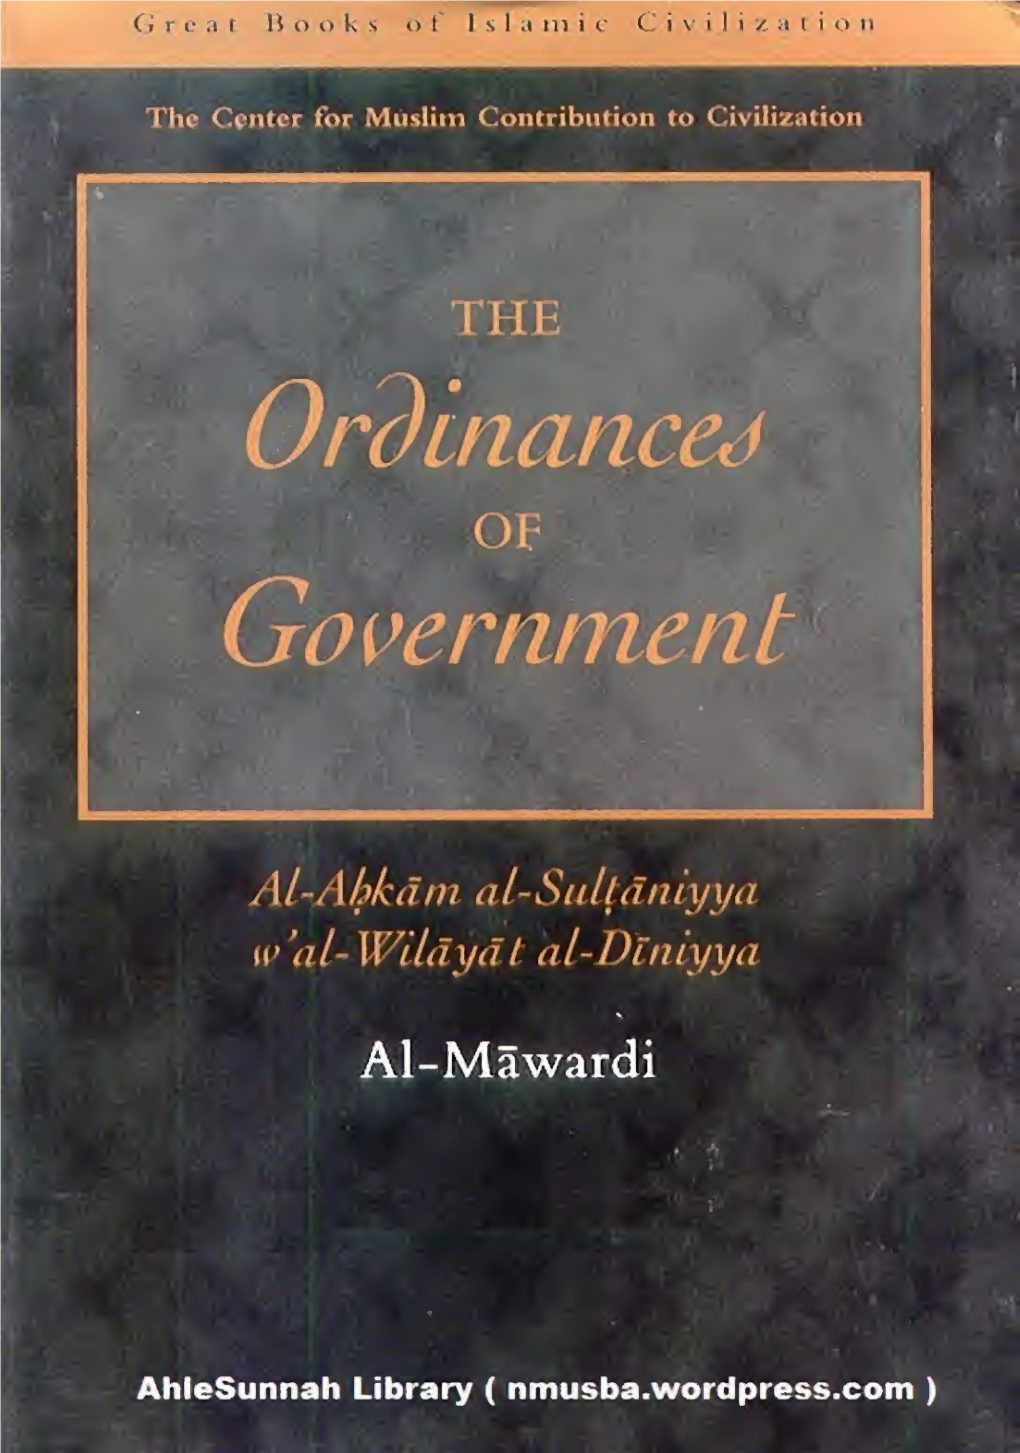 THE Ordinances of Government